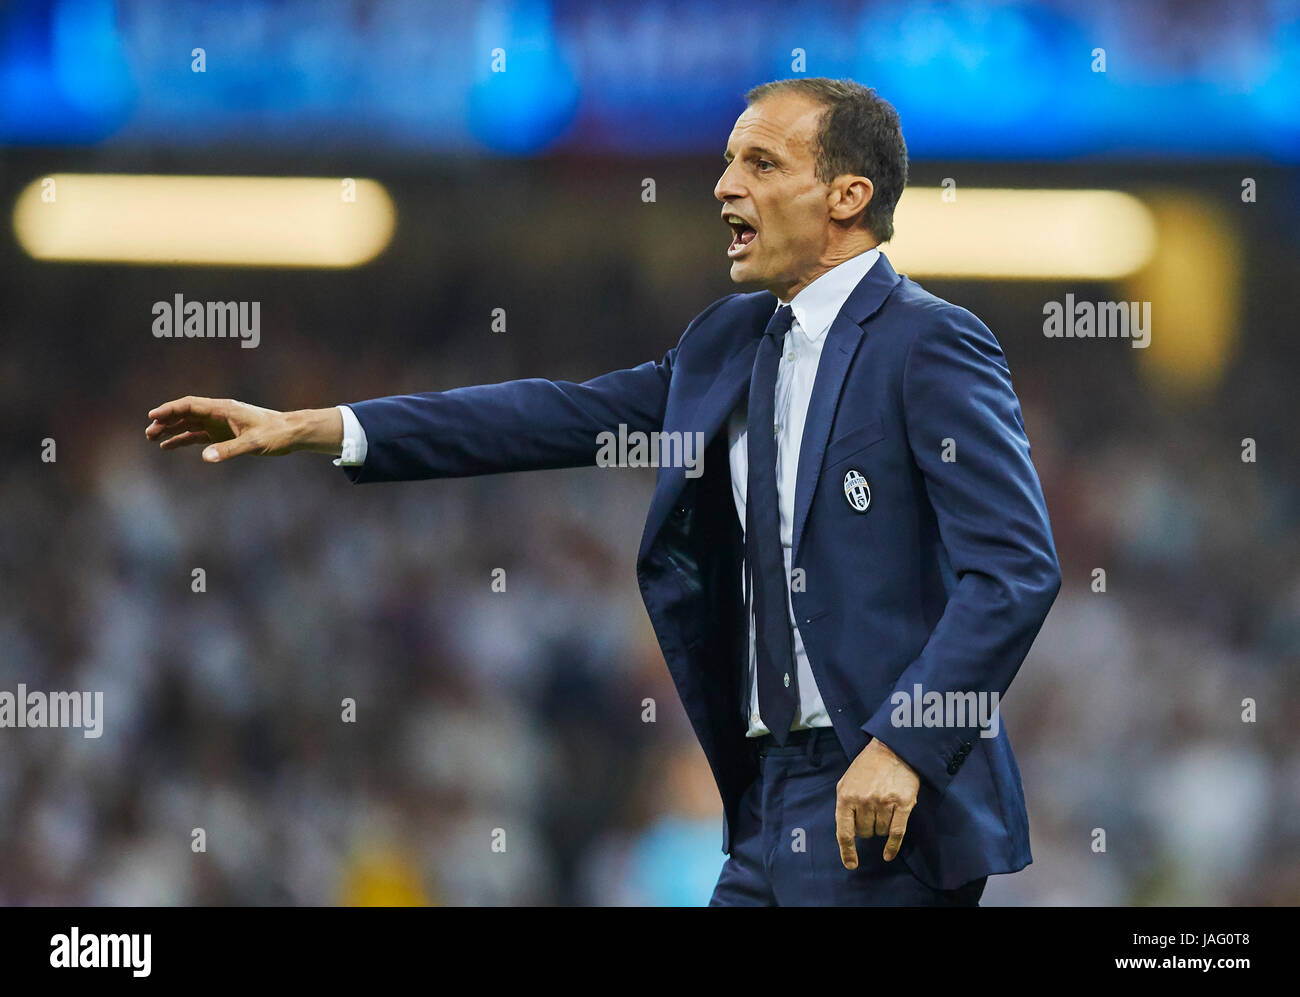 UEFA Champions League, Final, Cardiff, June 03 2017  Massimiliano ALLEGRI, JUVE Trainer Gesticulates and giving instructions, action, single image, ge Stock Photo